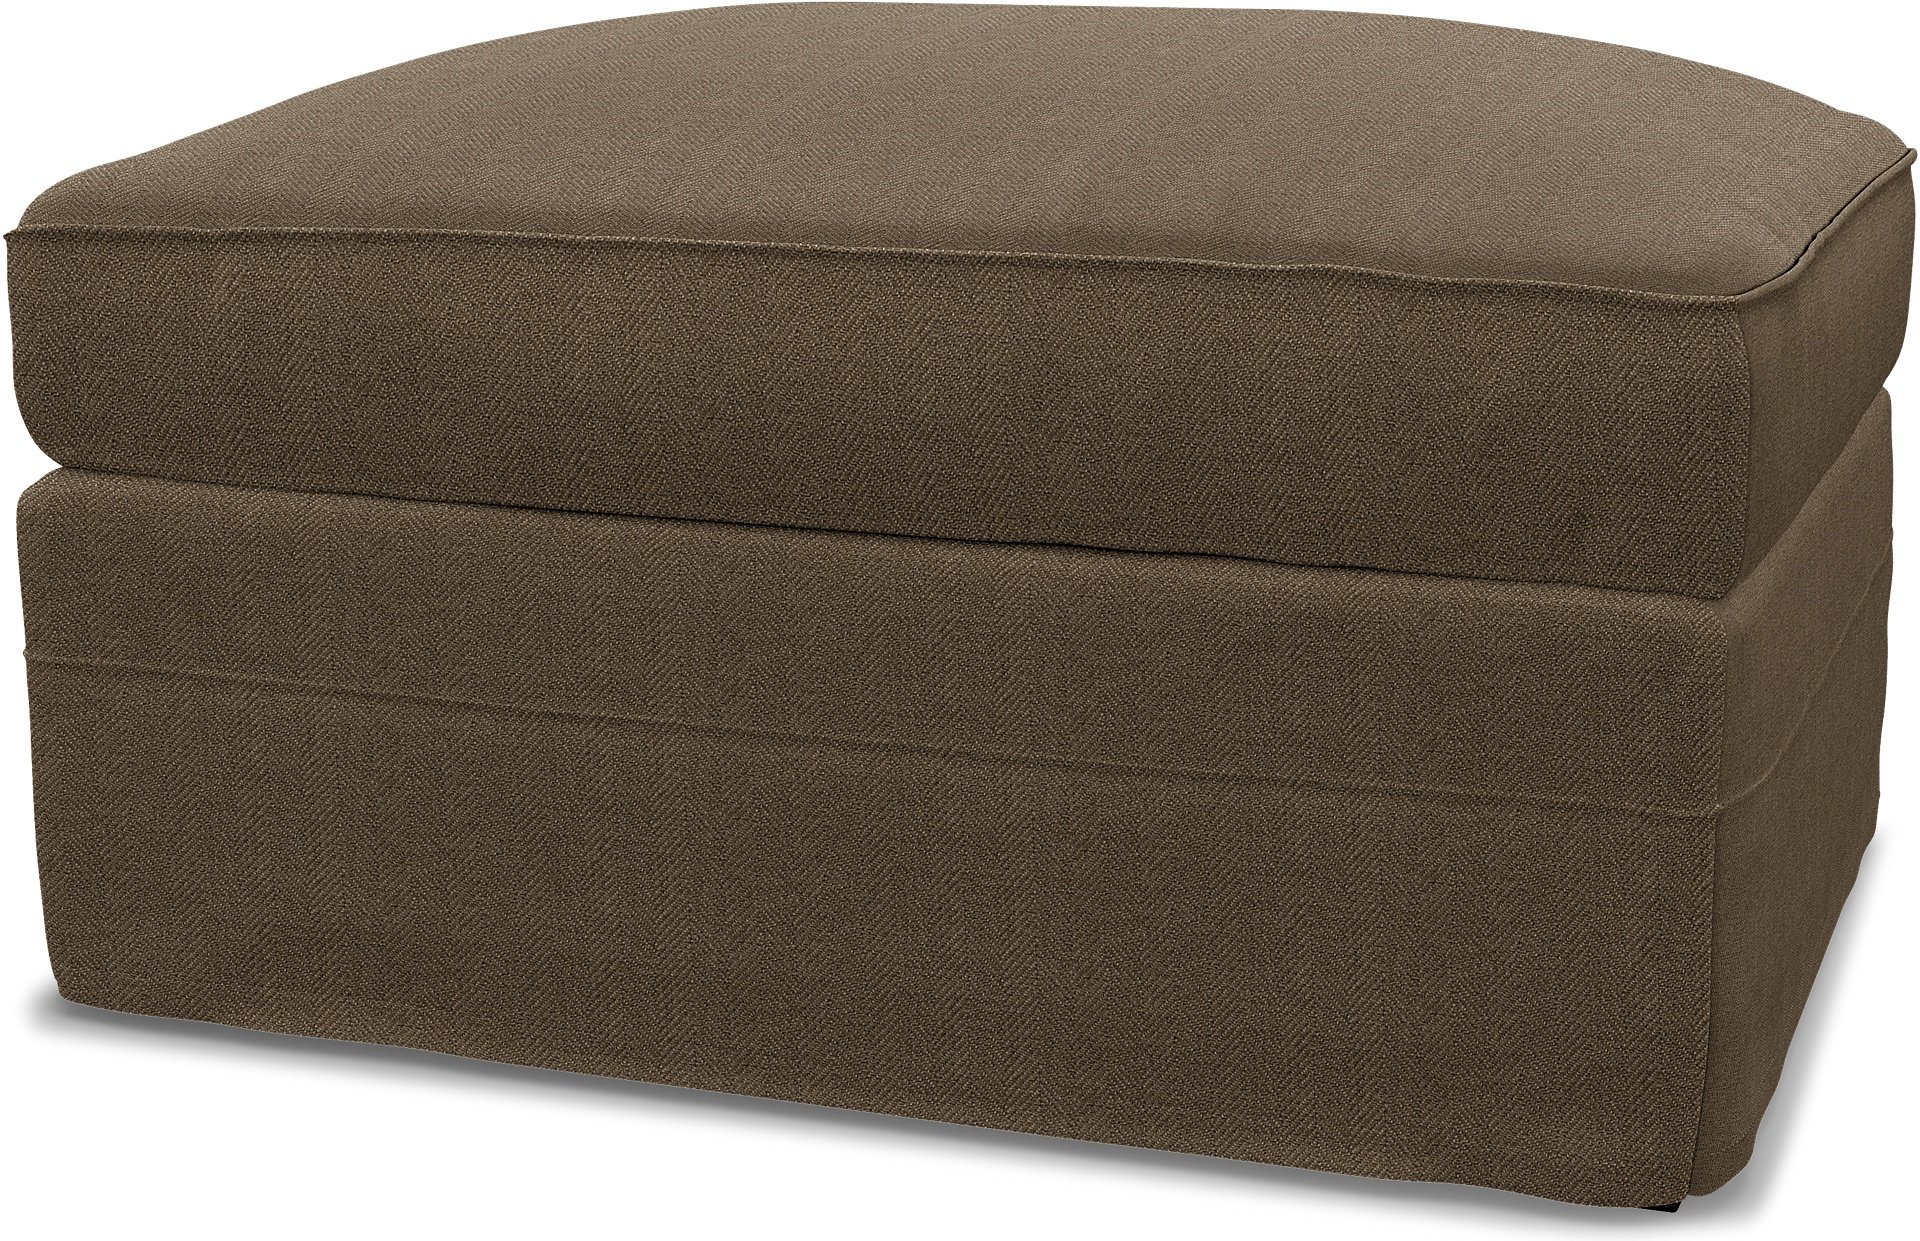 IKEA - Gronlid Footstool with Storage Cover, Dark Taupe, Boucle & Texture - Bemz